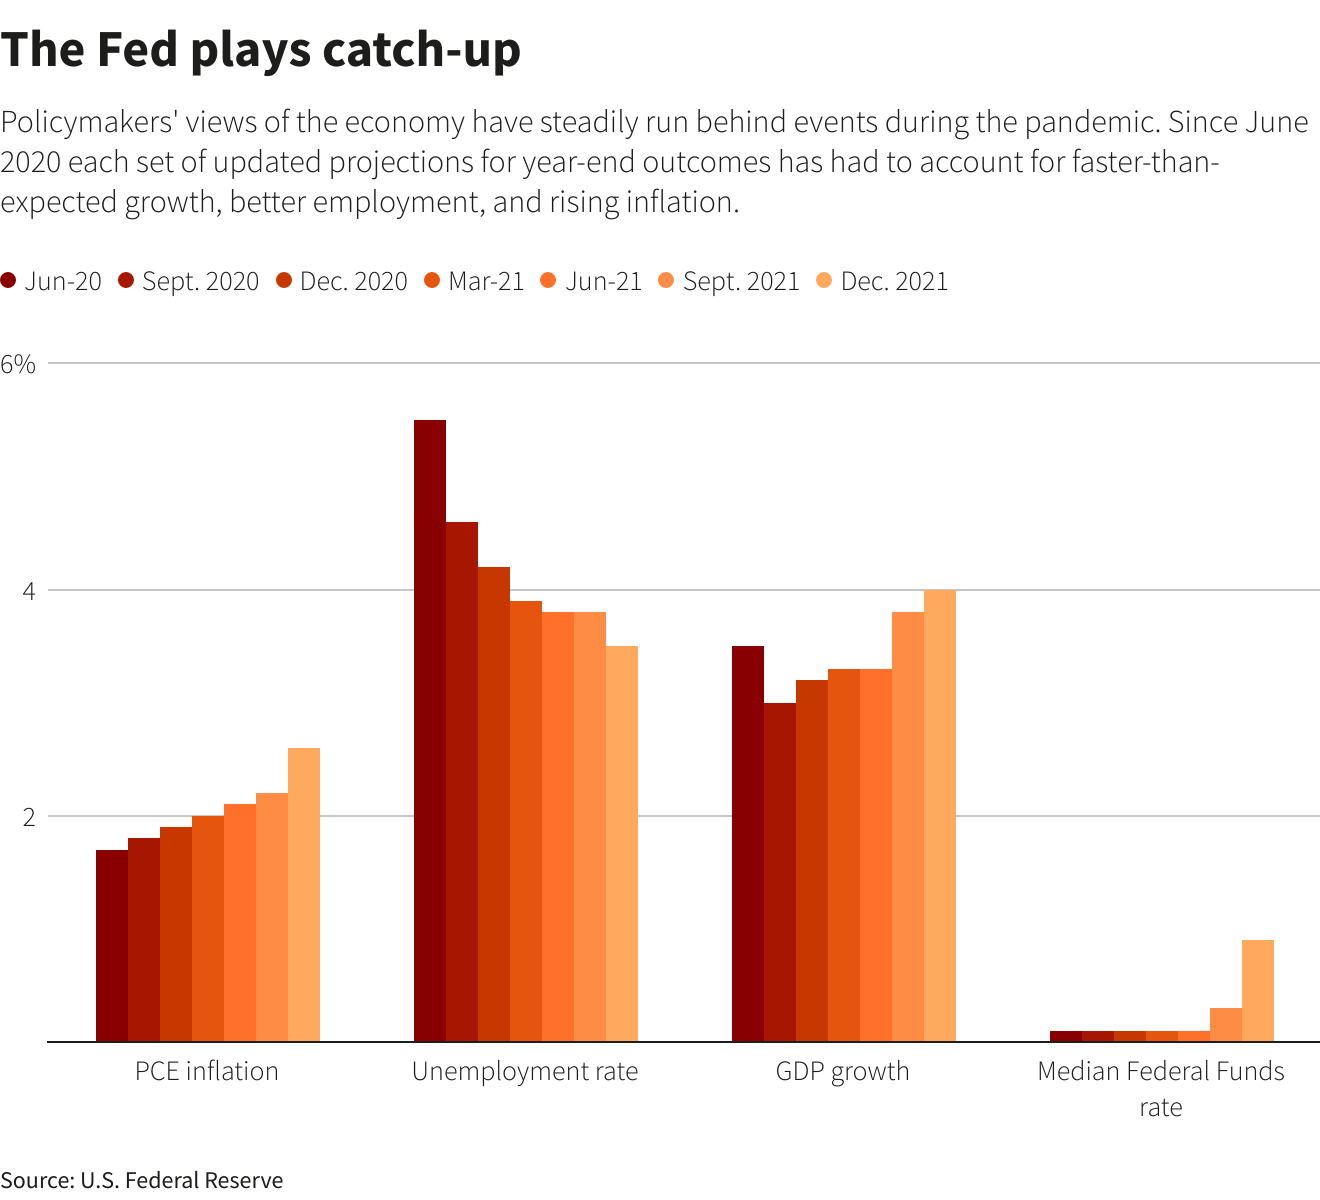 The Fed plays catch-up